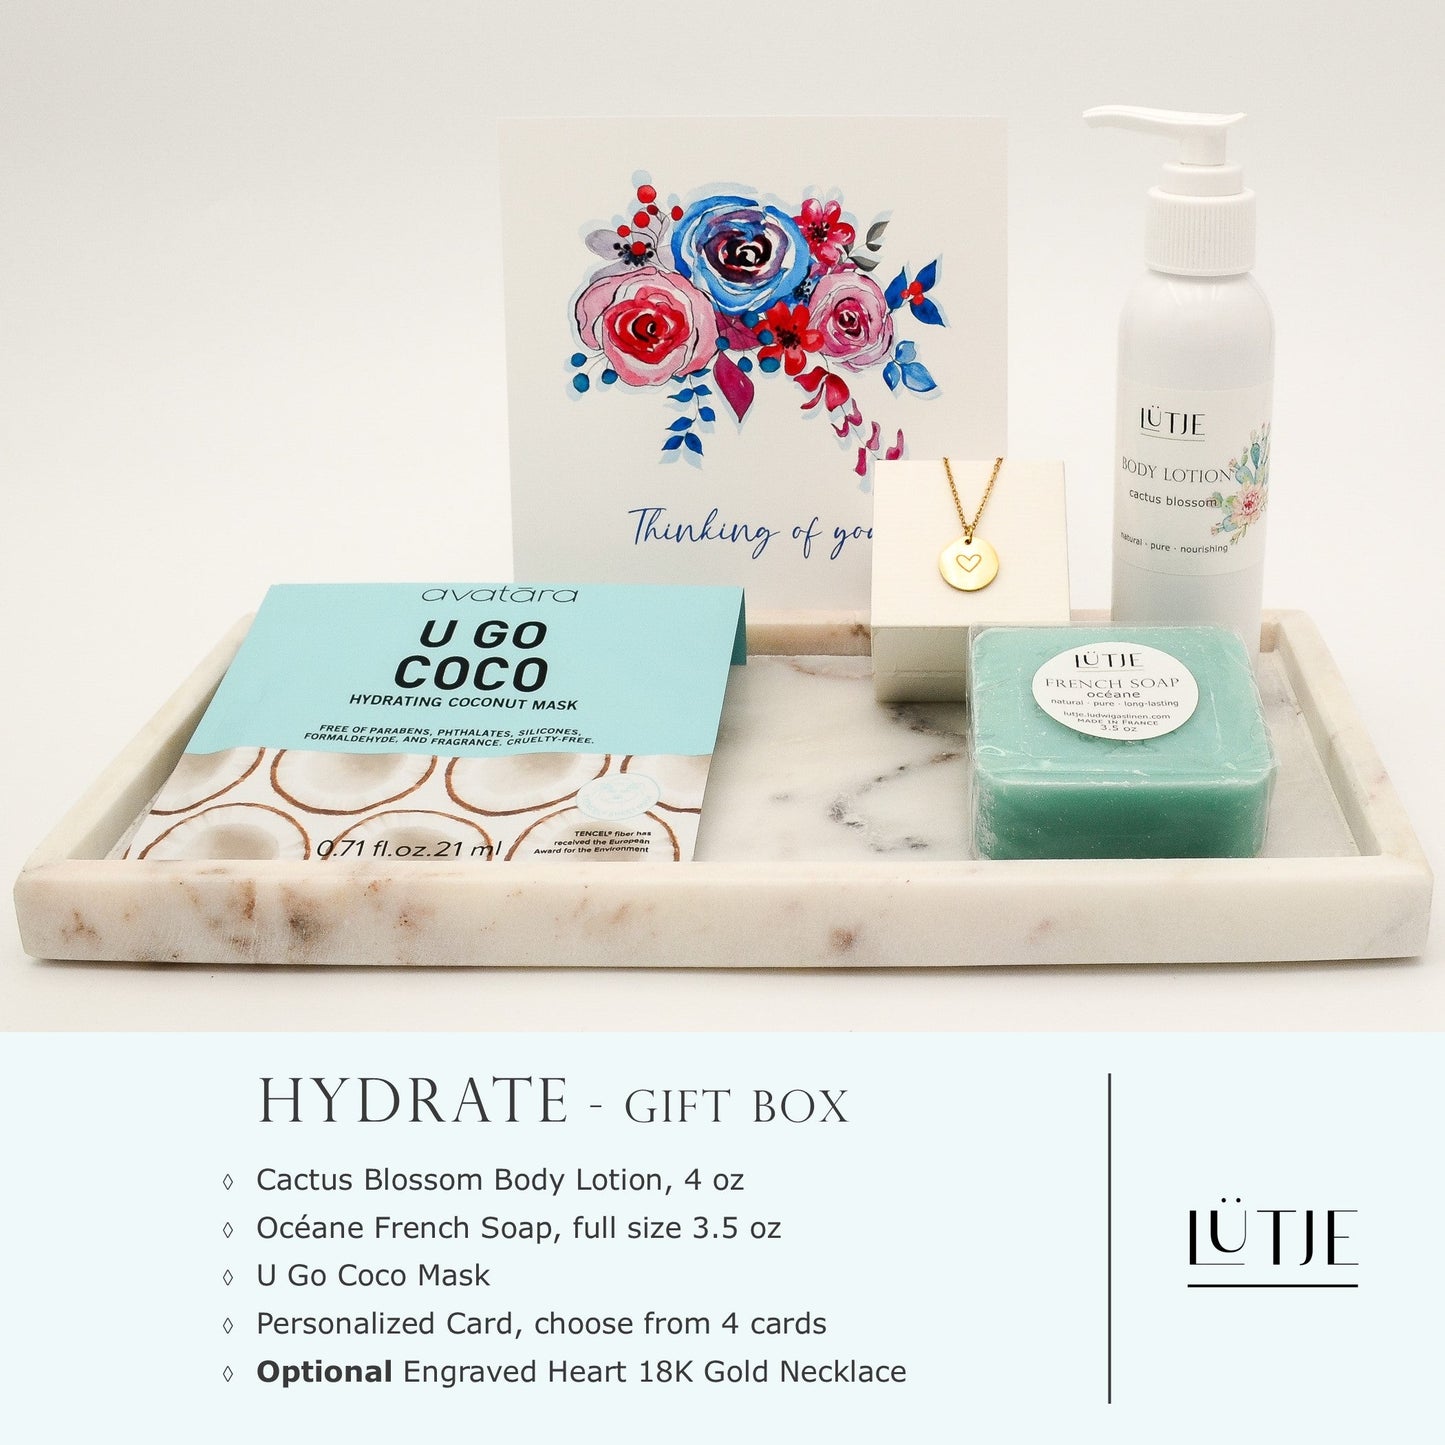 Hydrate Gift Box for women, daughter, mom, BFF, wife, sister or grandma, includes Cactus Blossom body lotion, French soap, hydrating face mask, and 18K gold-plated necklace with engraved heart.